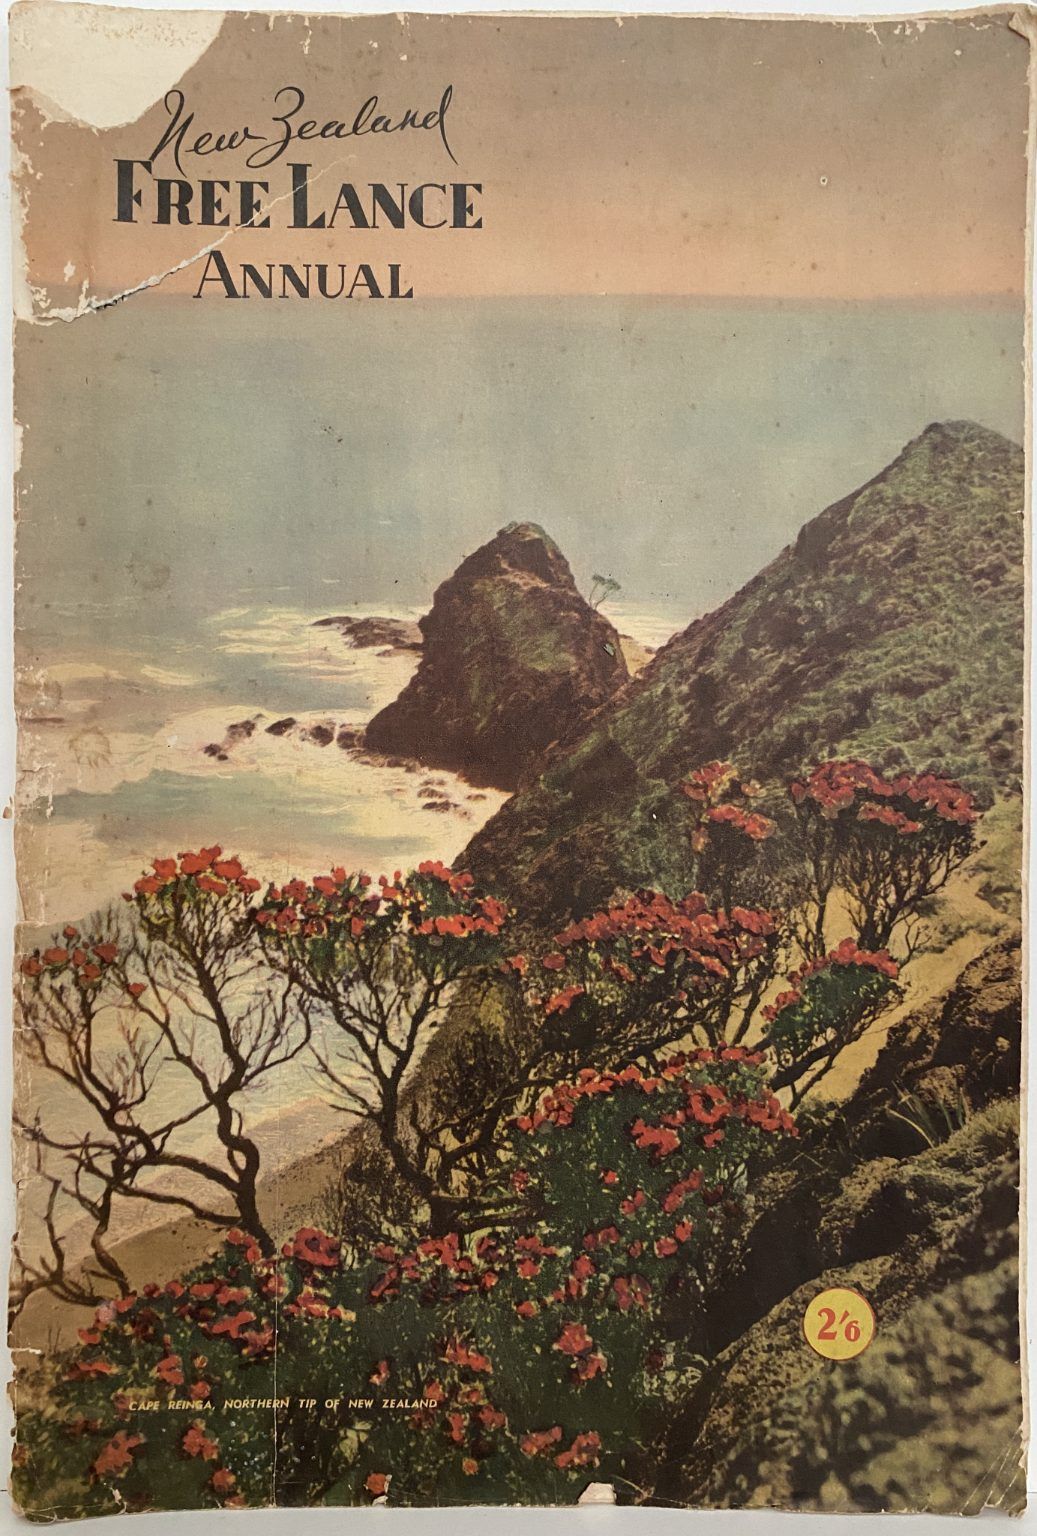 OLD NEWSPAPER: New Zealand Free Lance - Annual 1947